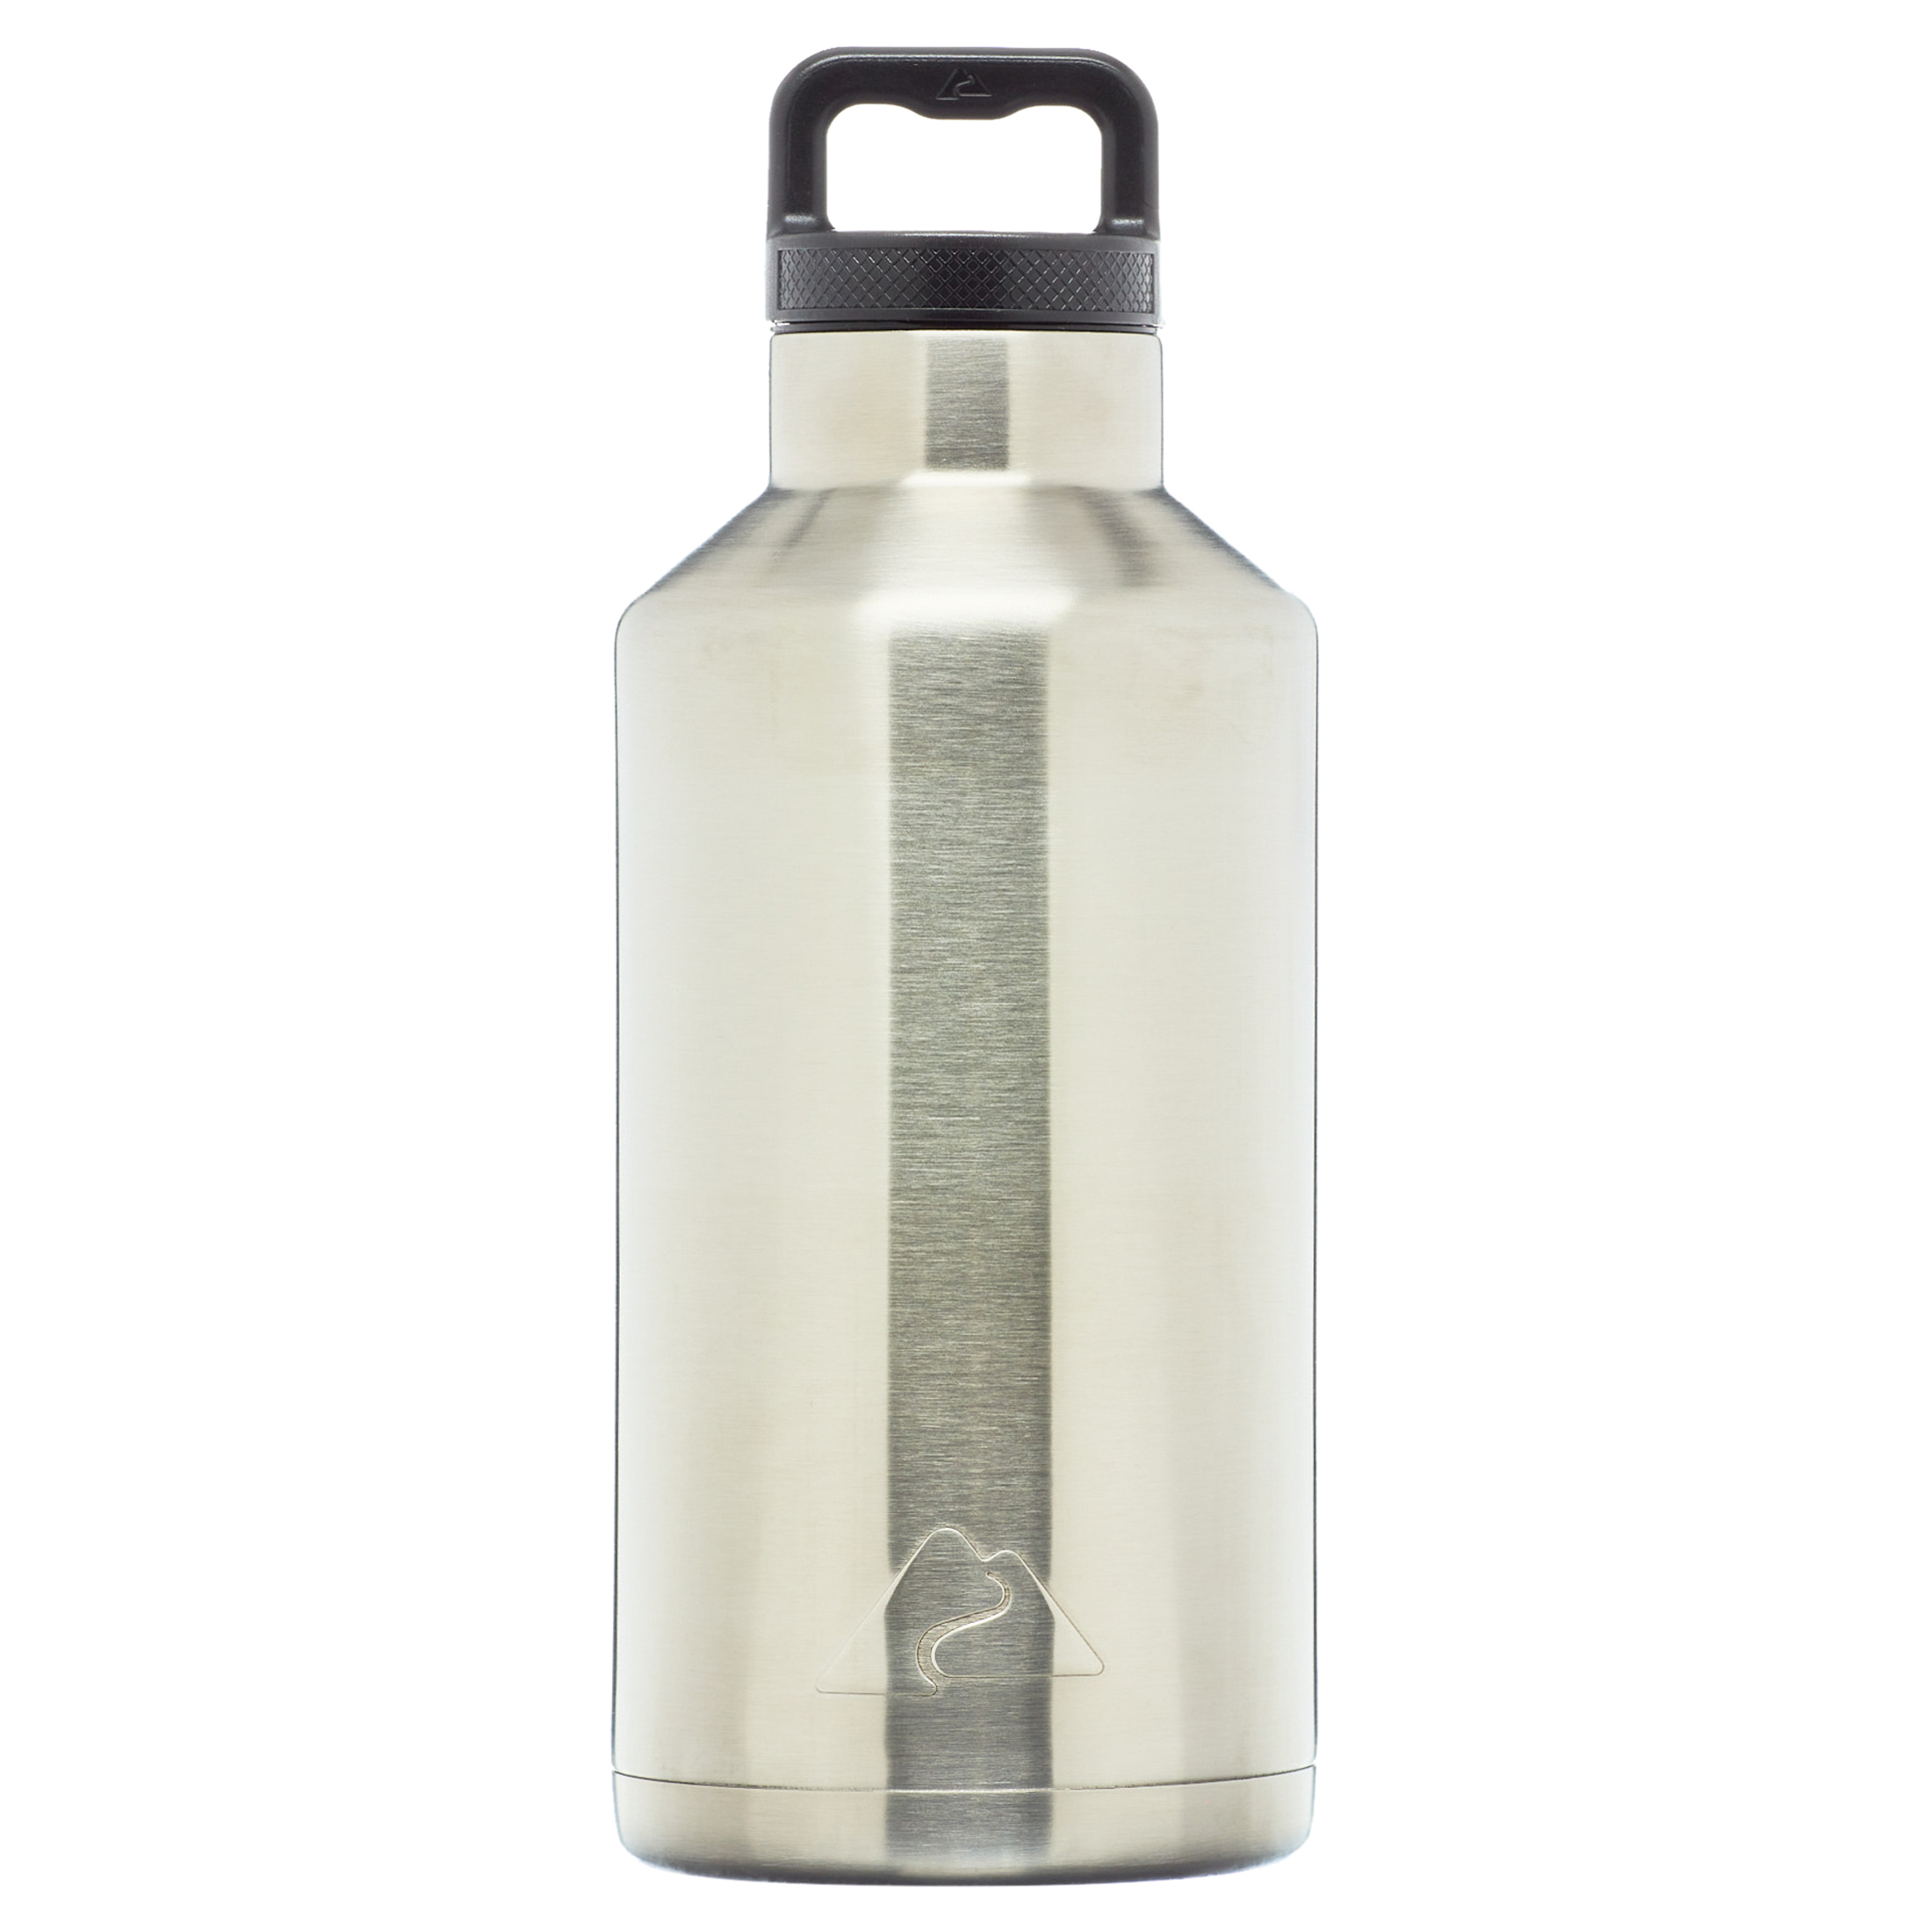 Ozark Trail Double Wall Stainless Steel Water Bottle - image 4 of 7